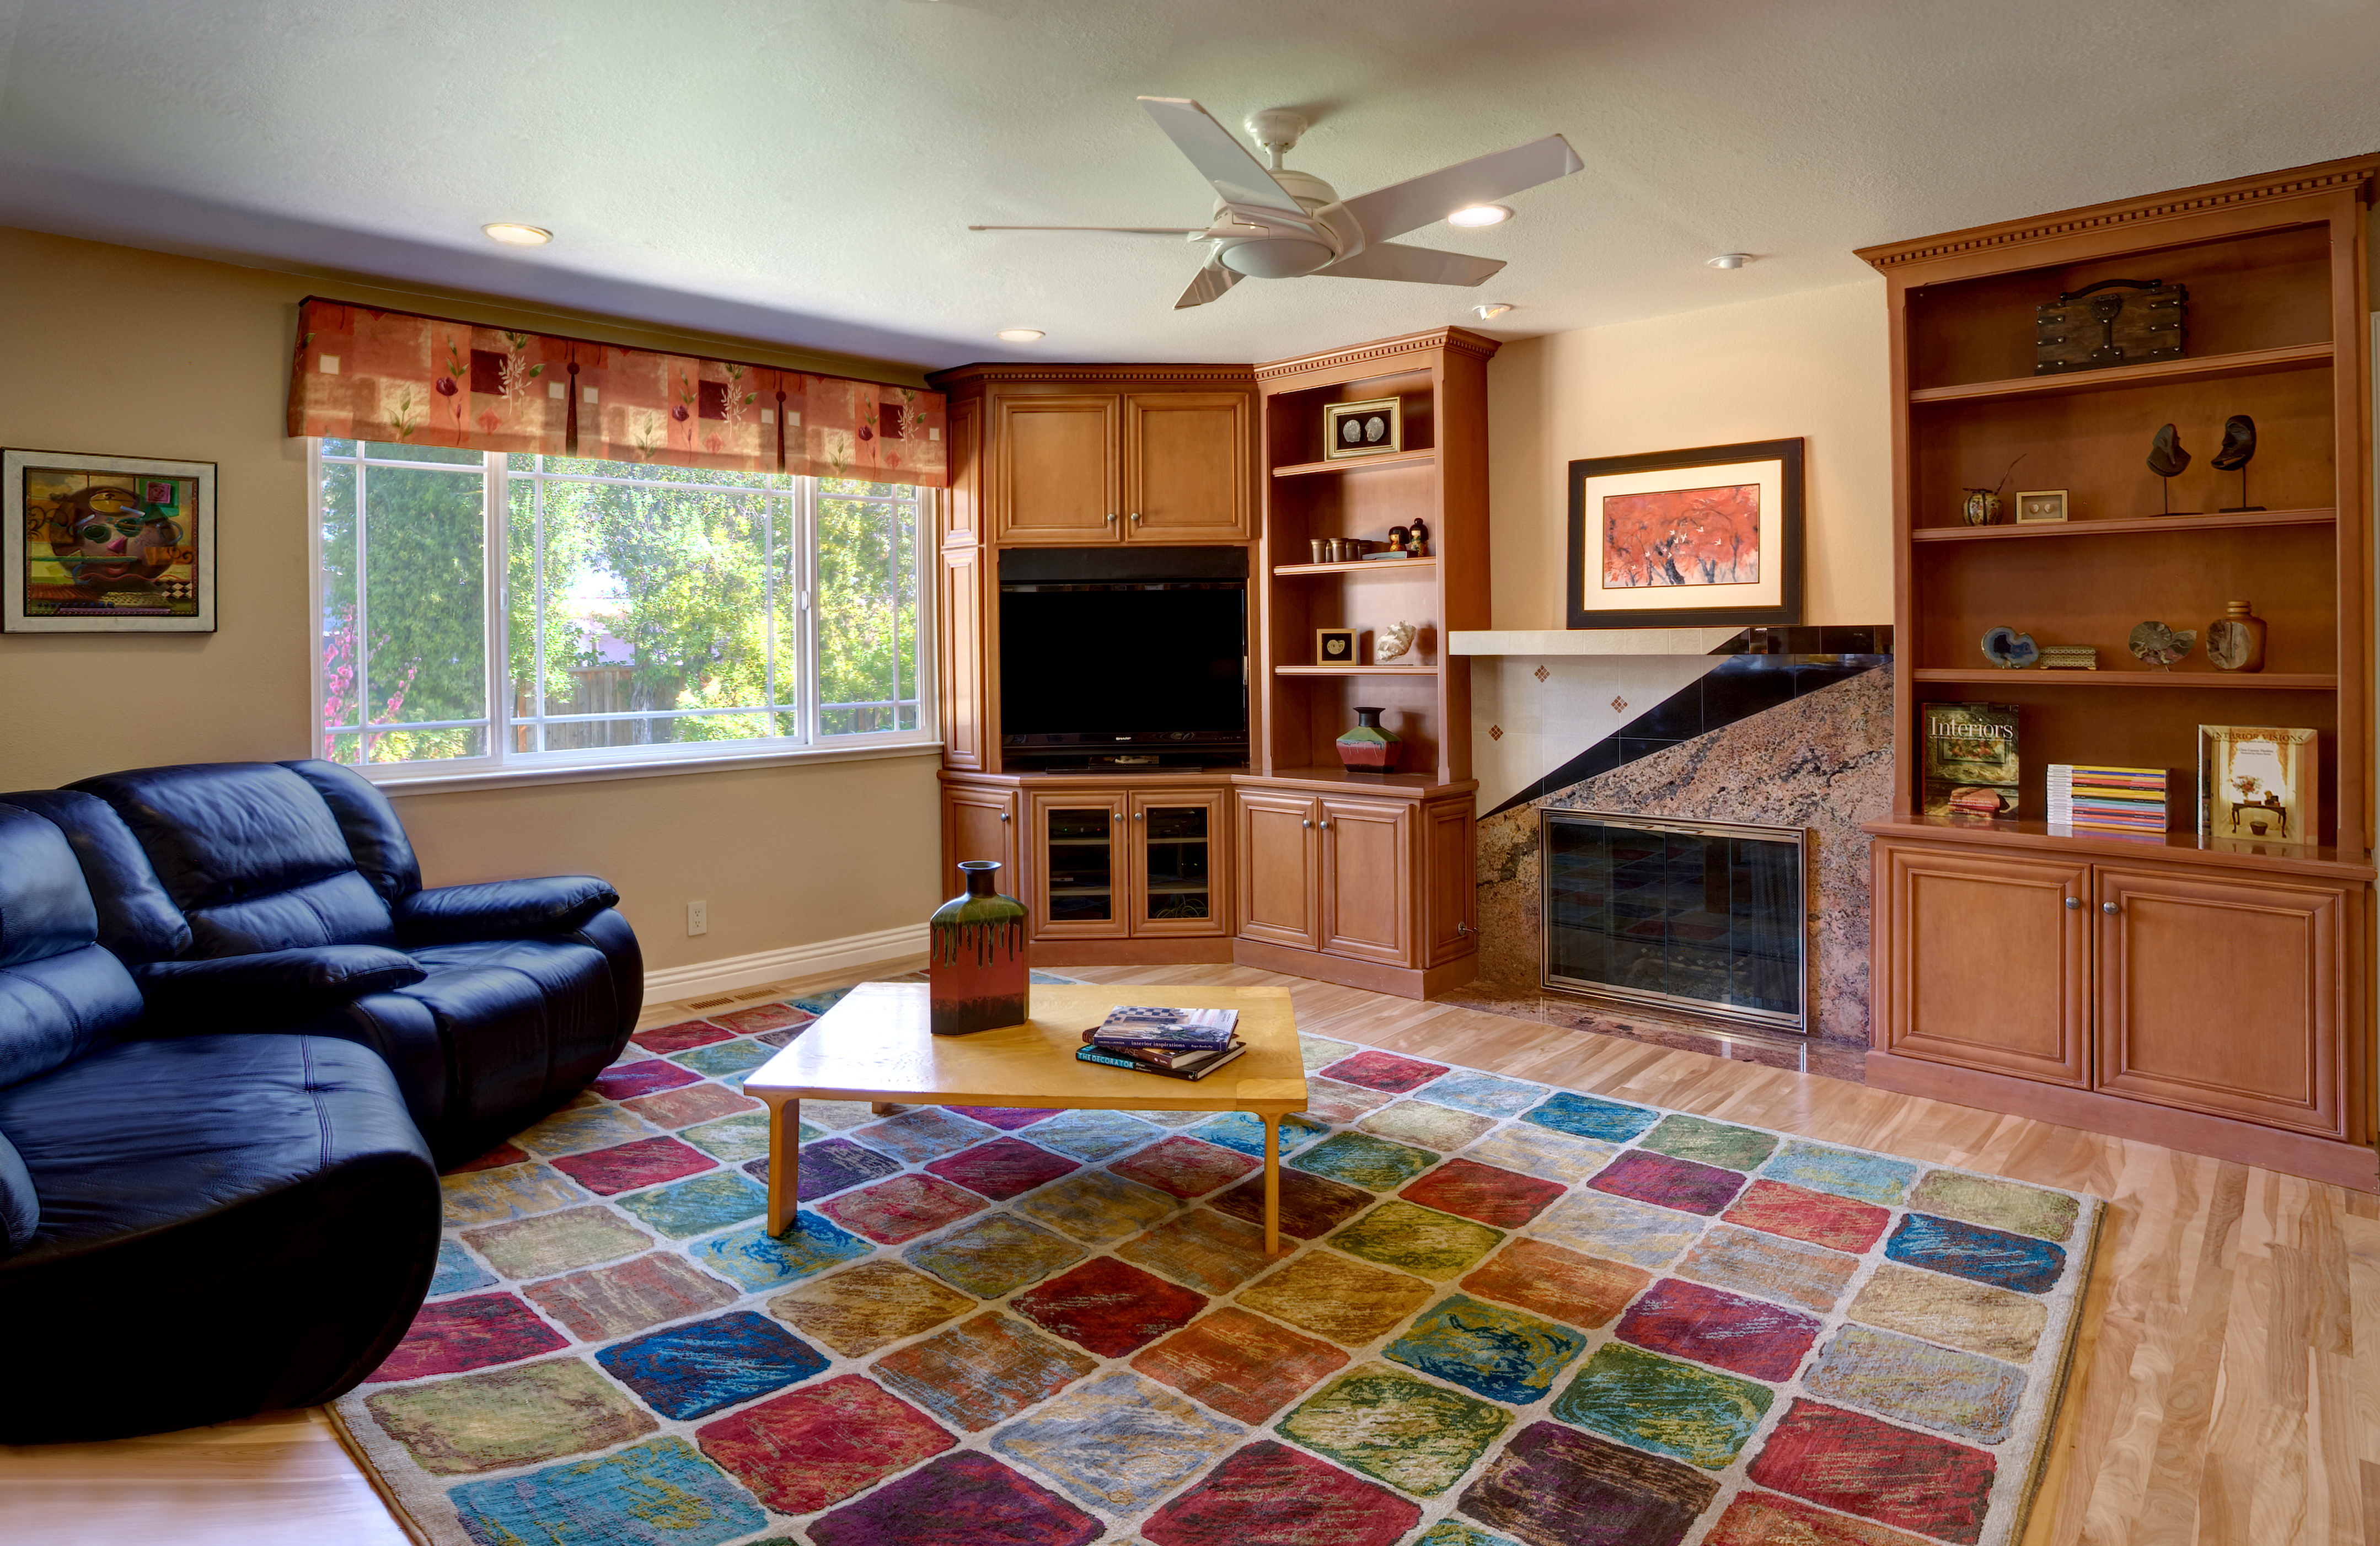 Remodeled Saratoga family room with new cabinetry, fireplace mantle, drapery and flooring